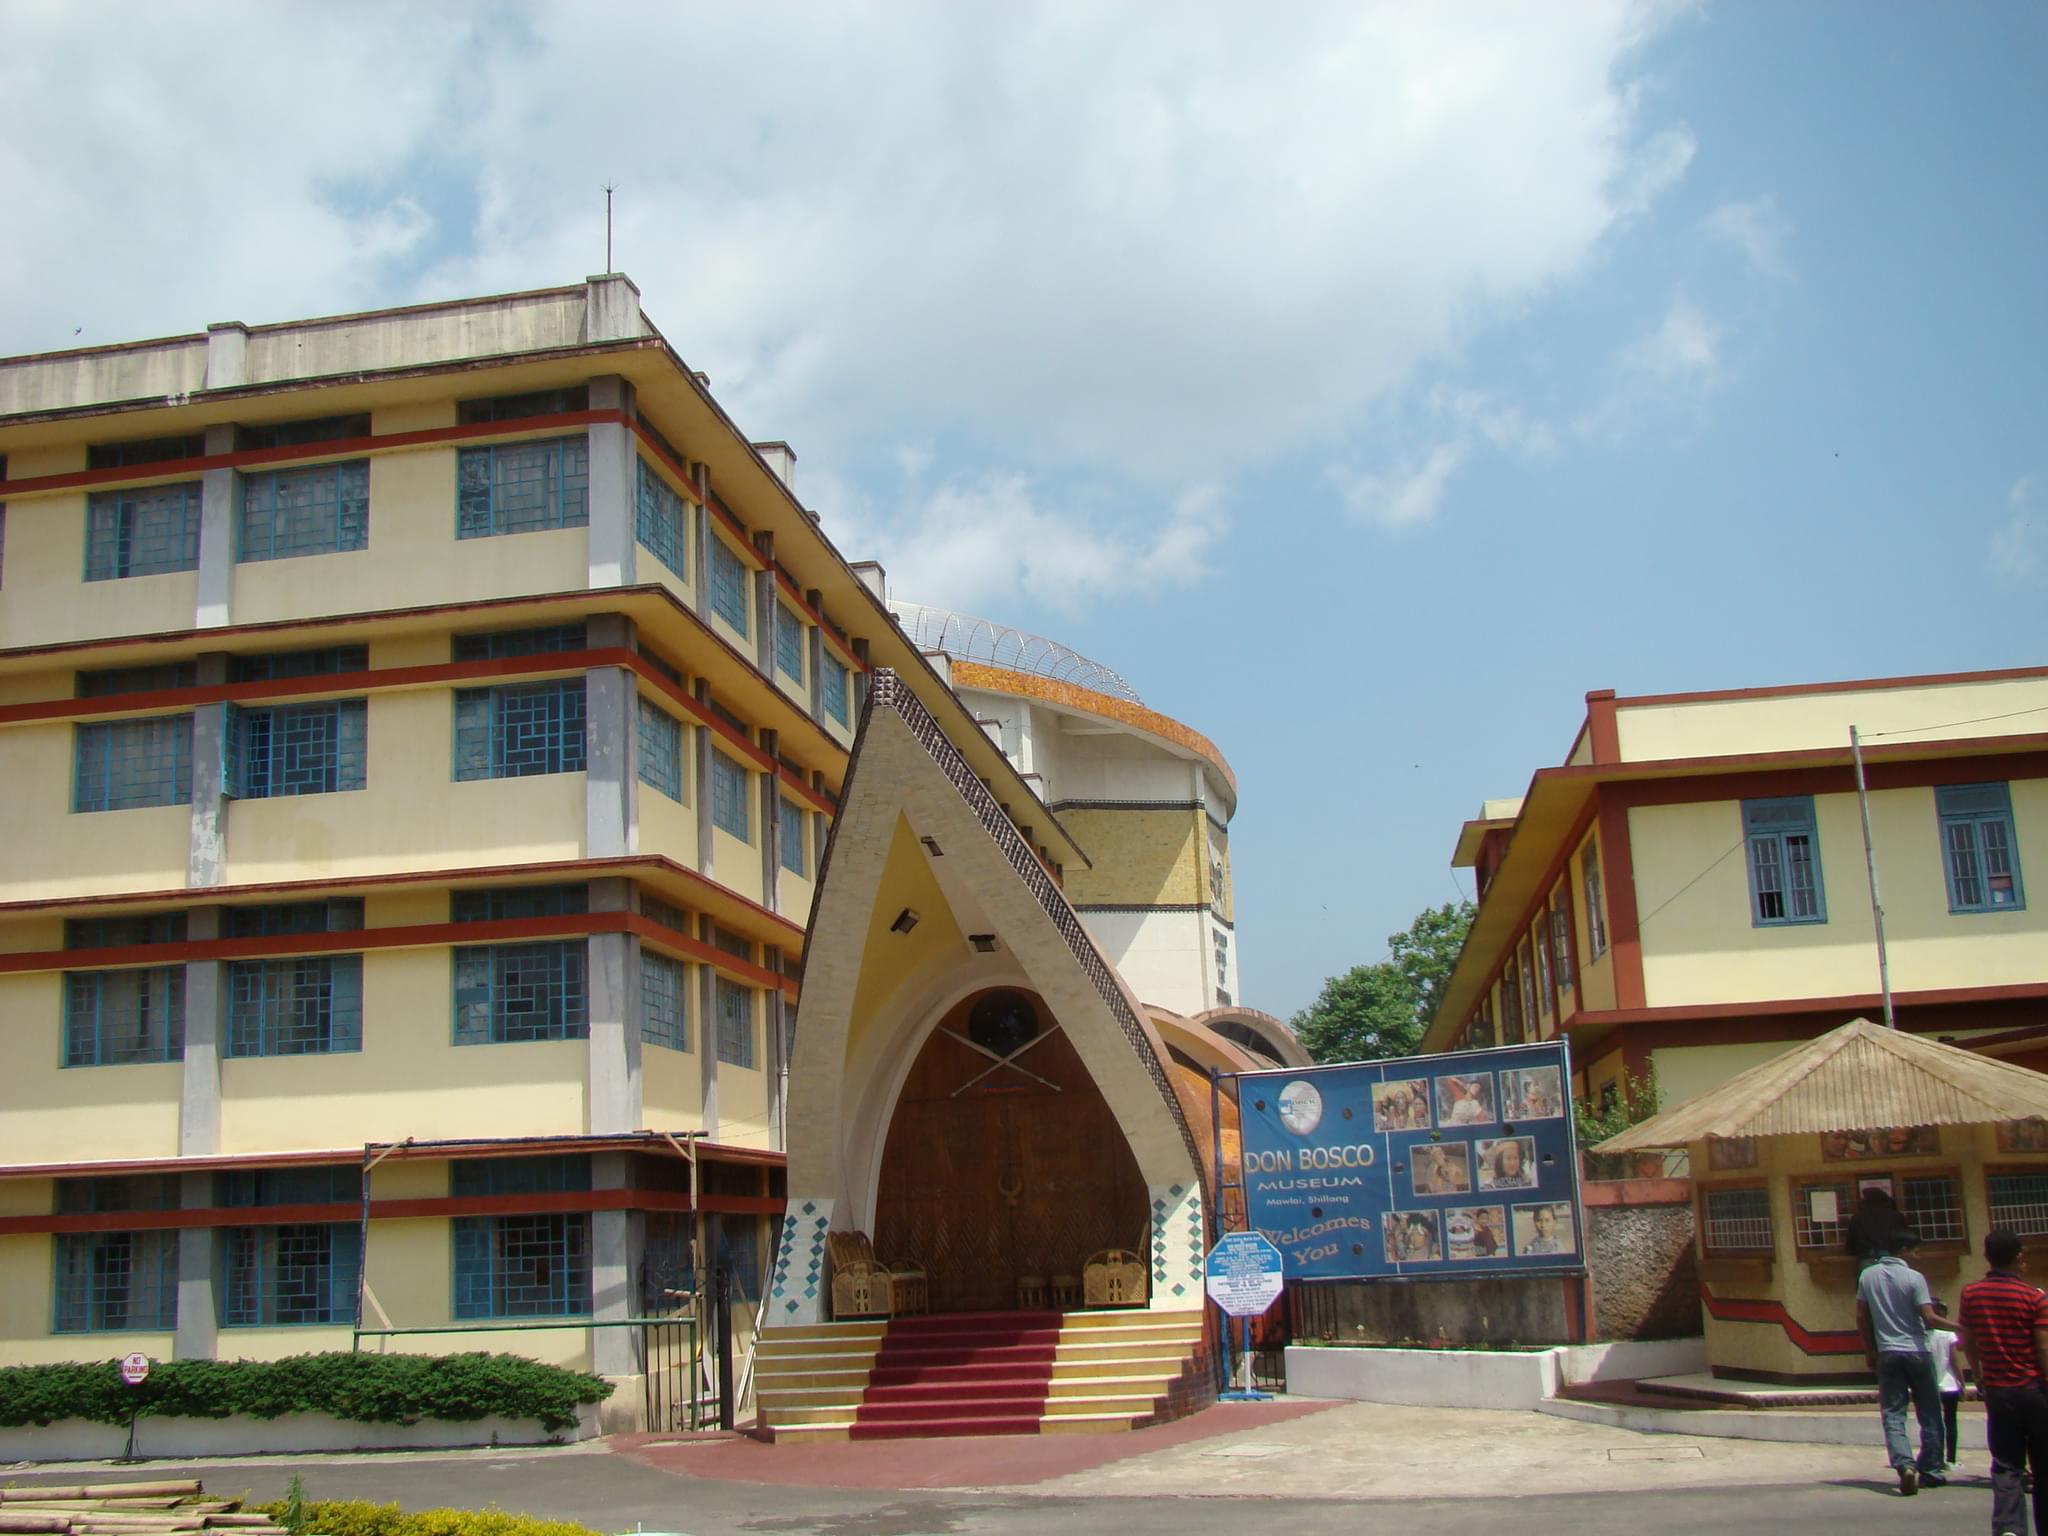 Don Bosco Museum Overview